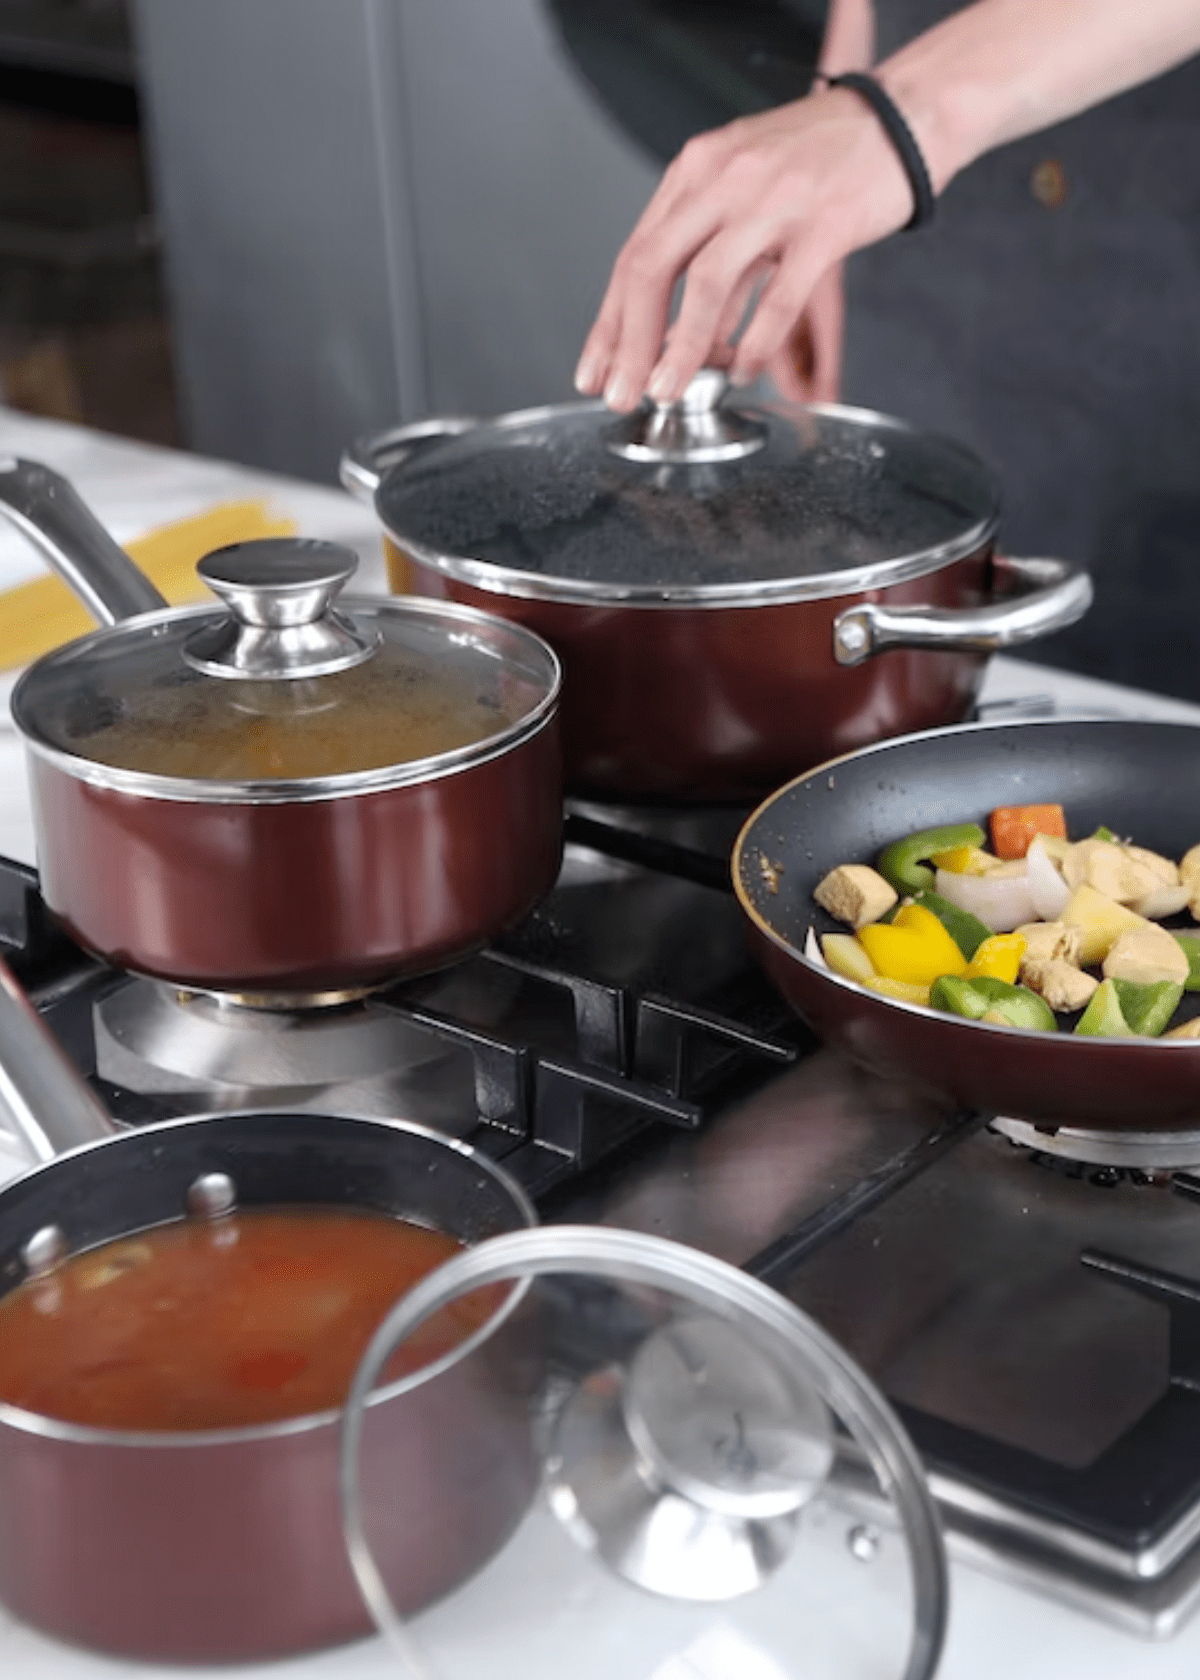 Cookware safety